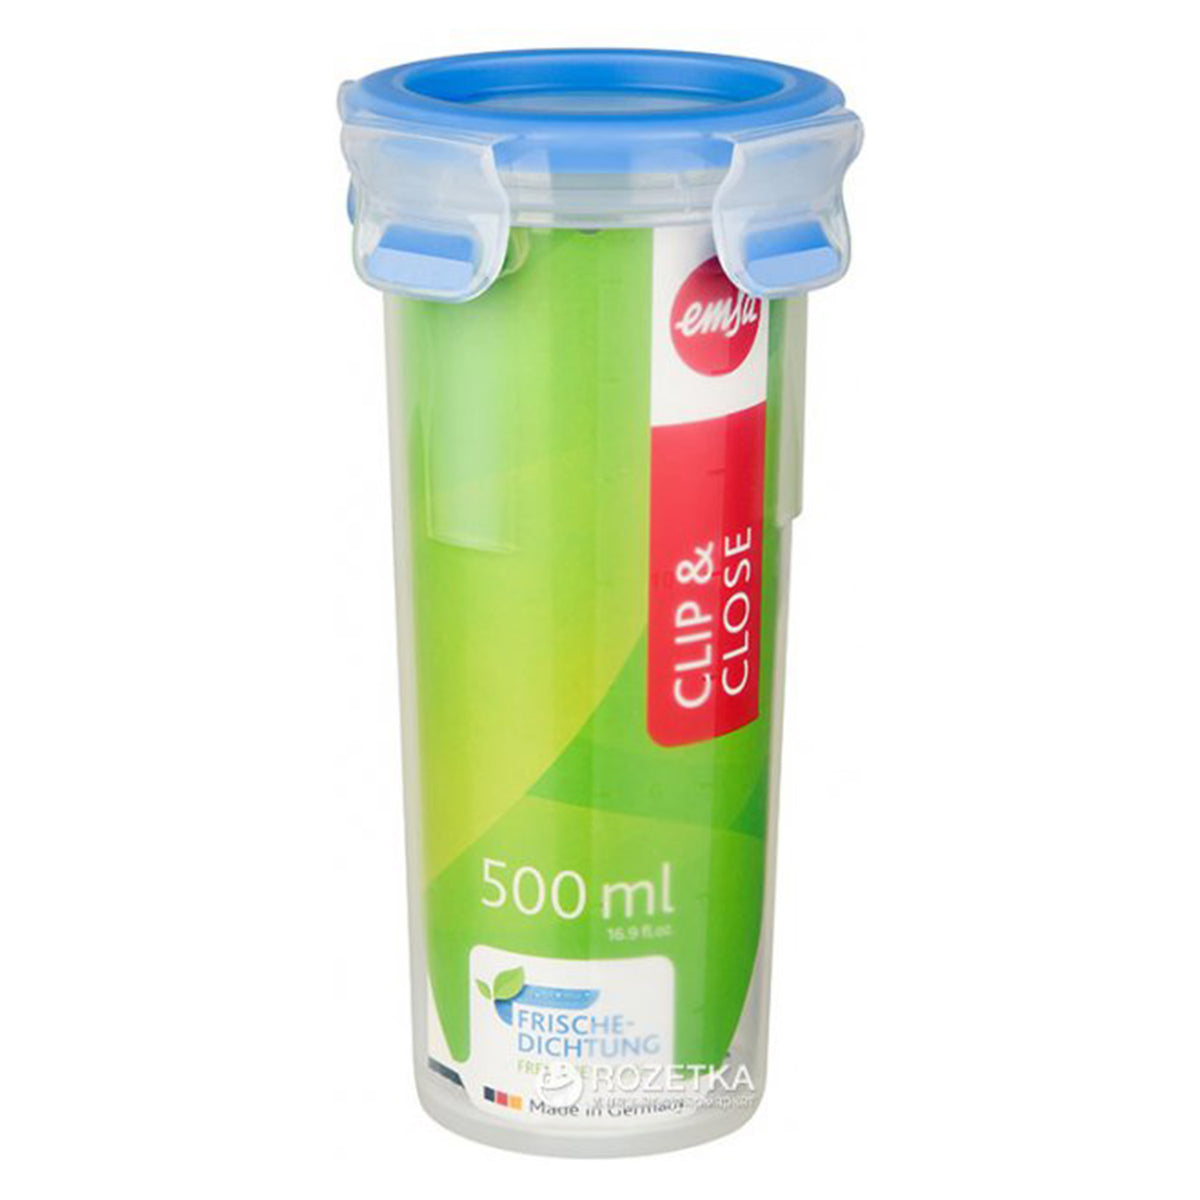 Round Food Canister - Clear